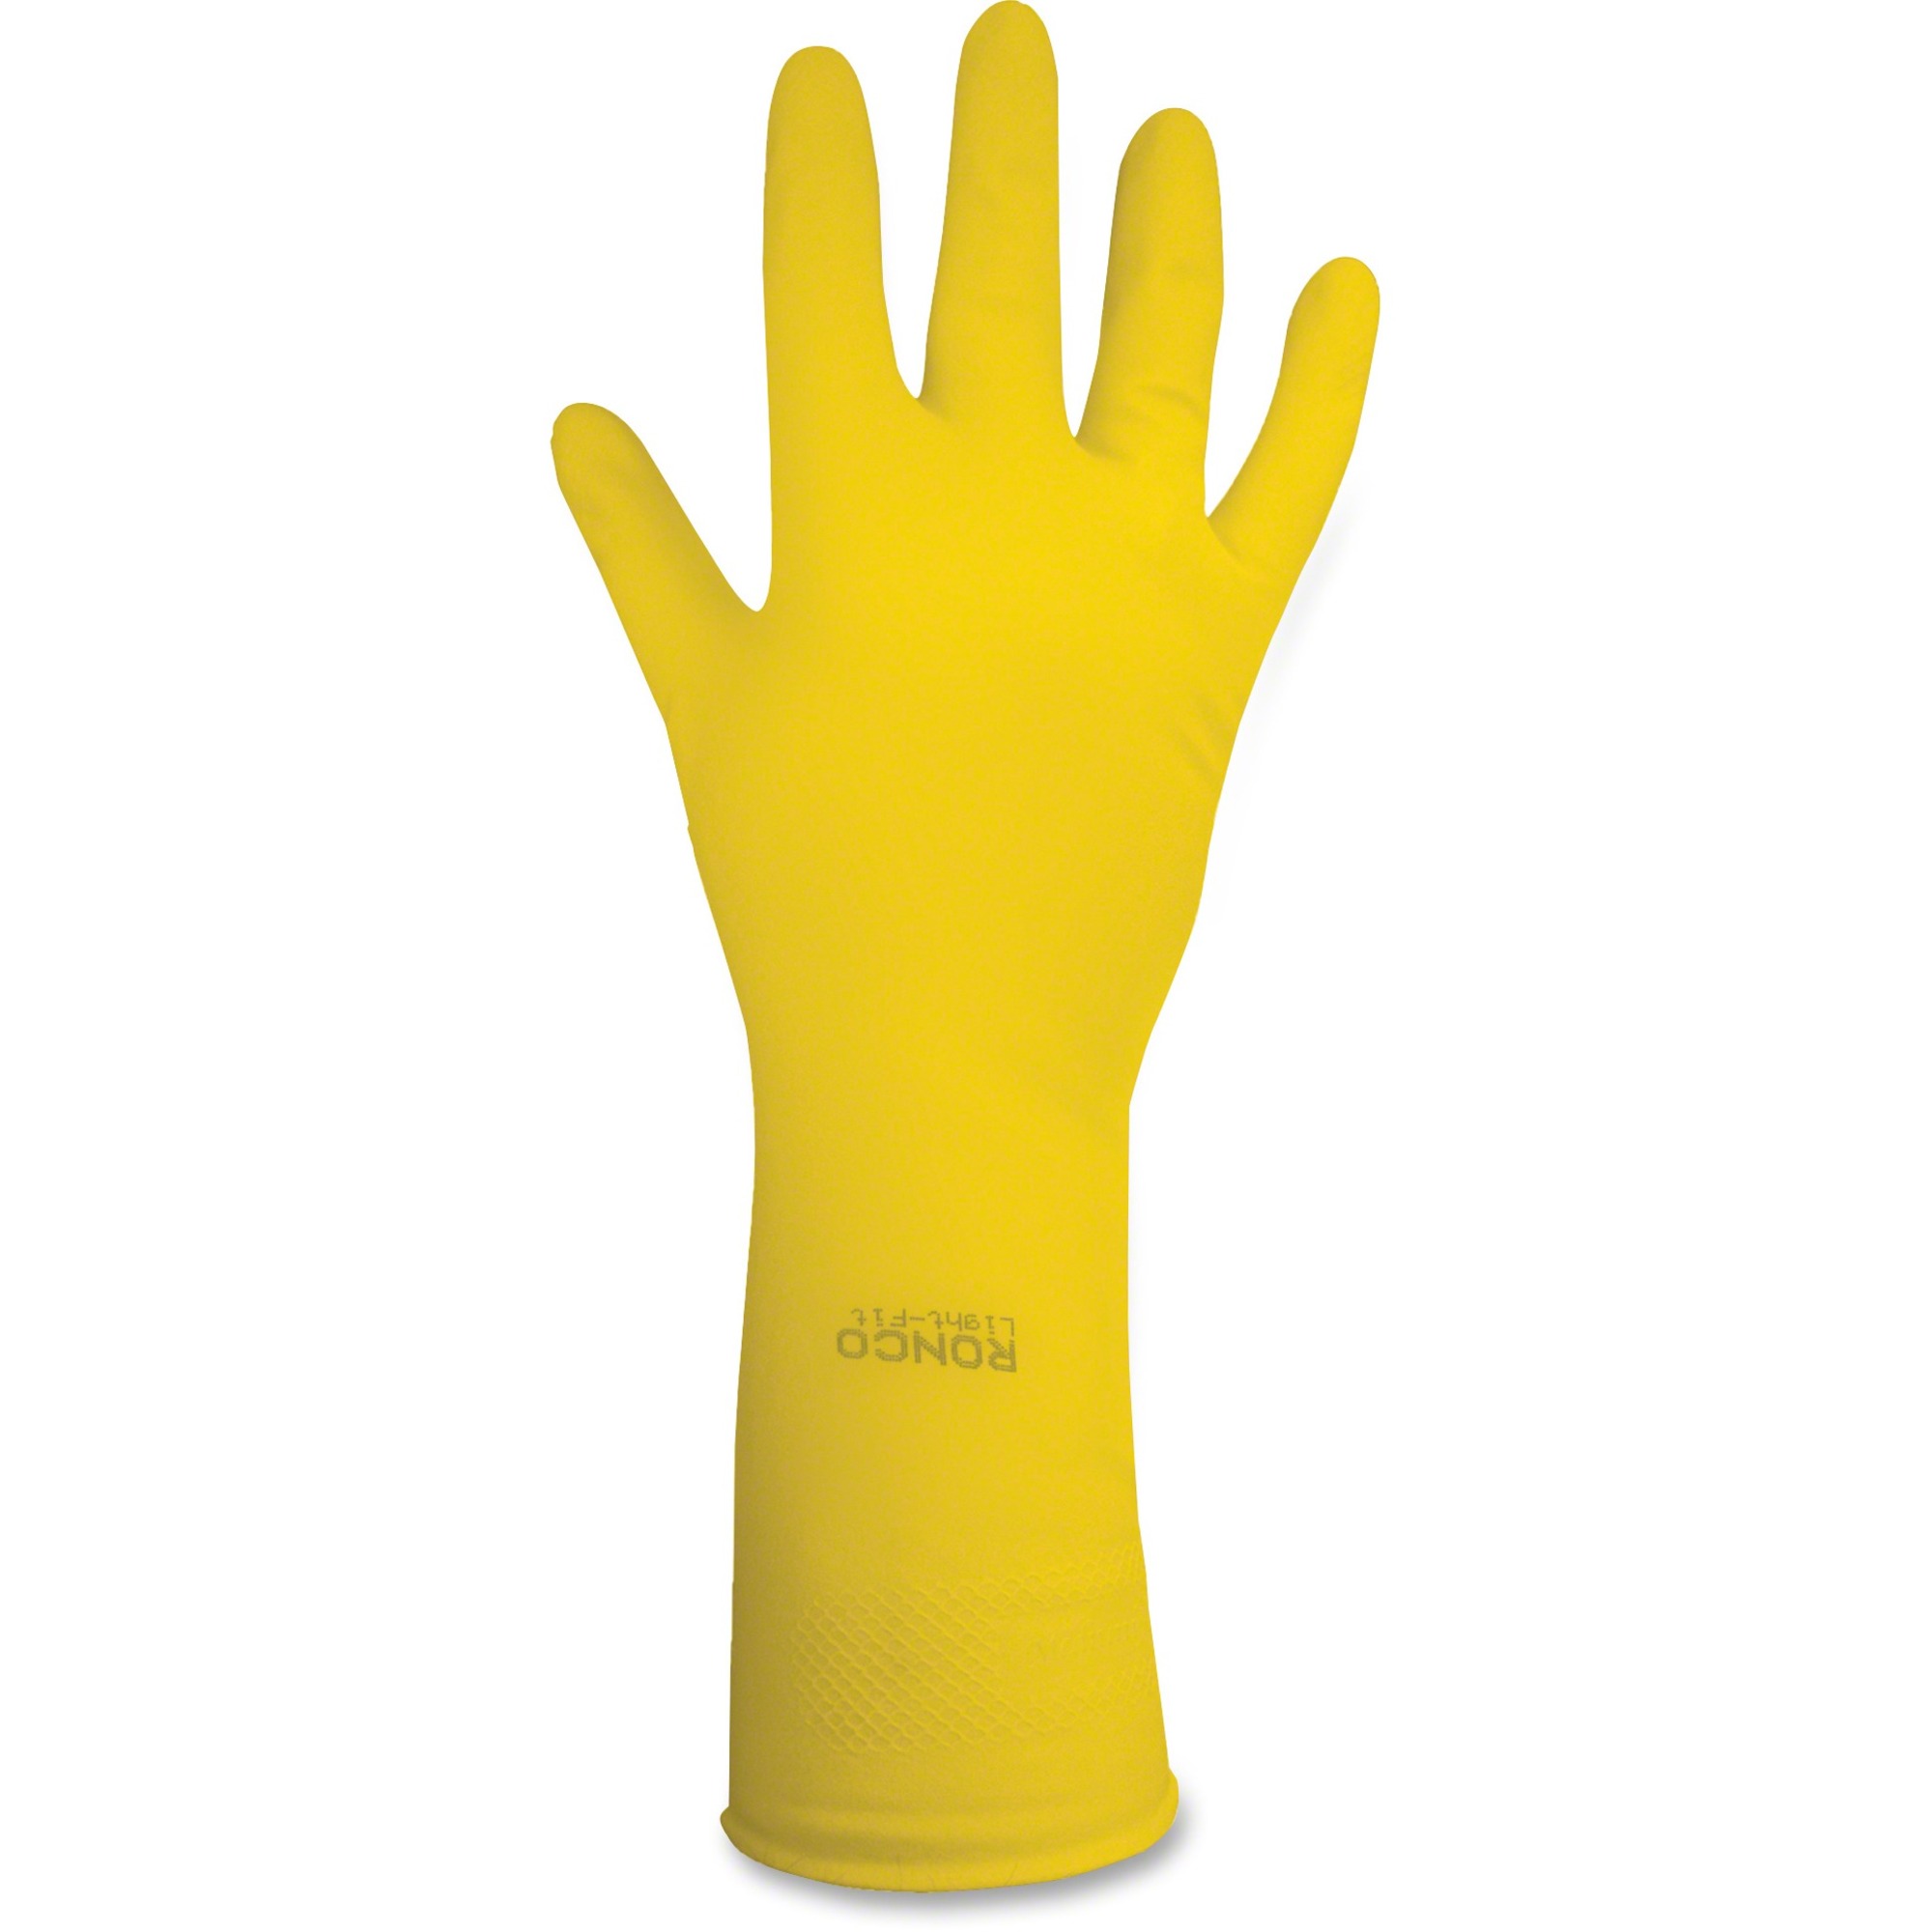 RONCO Flock Lined Light Duty Latex Gloves - Large Size - Reusable